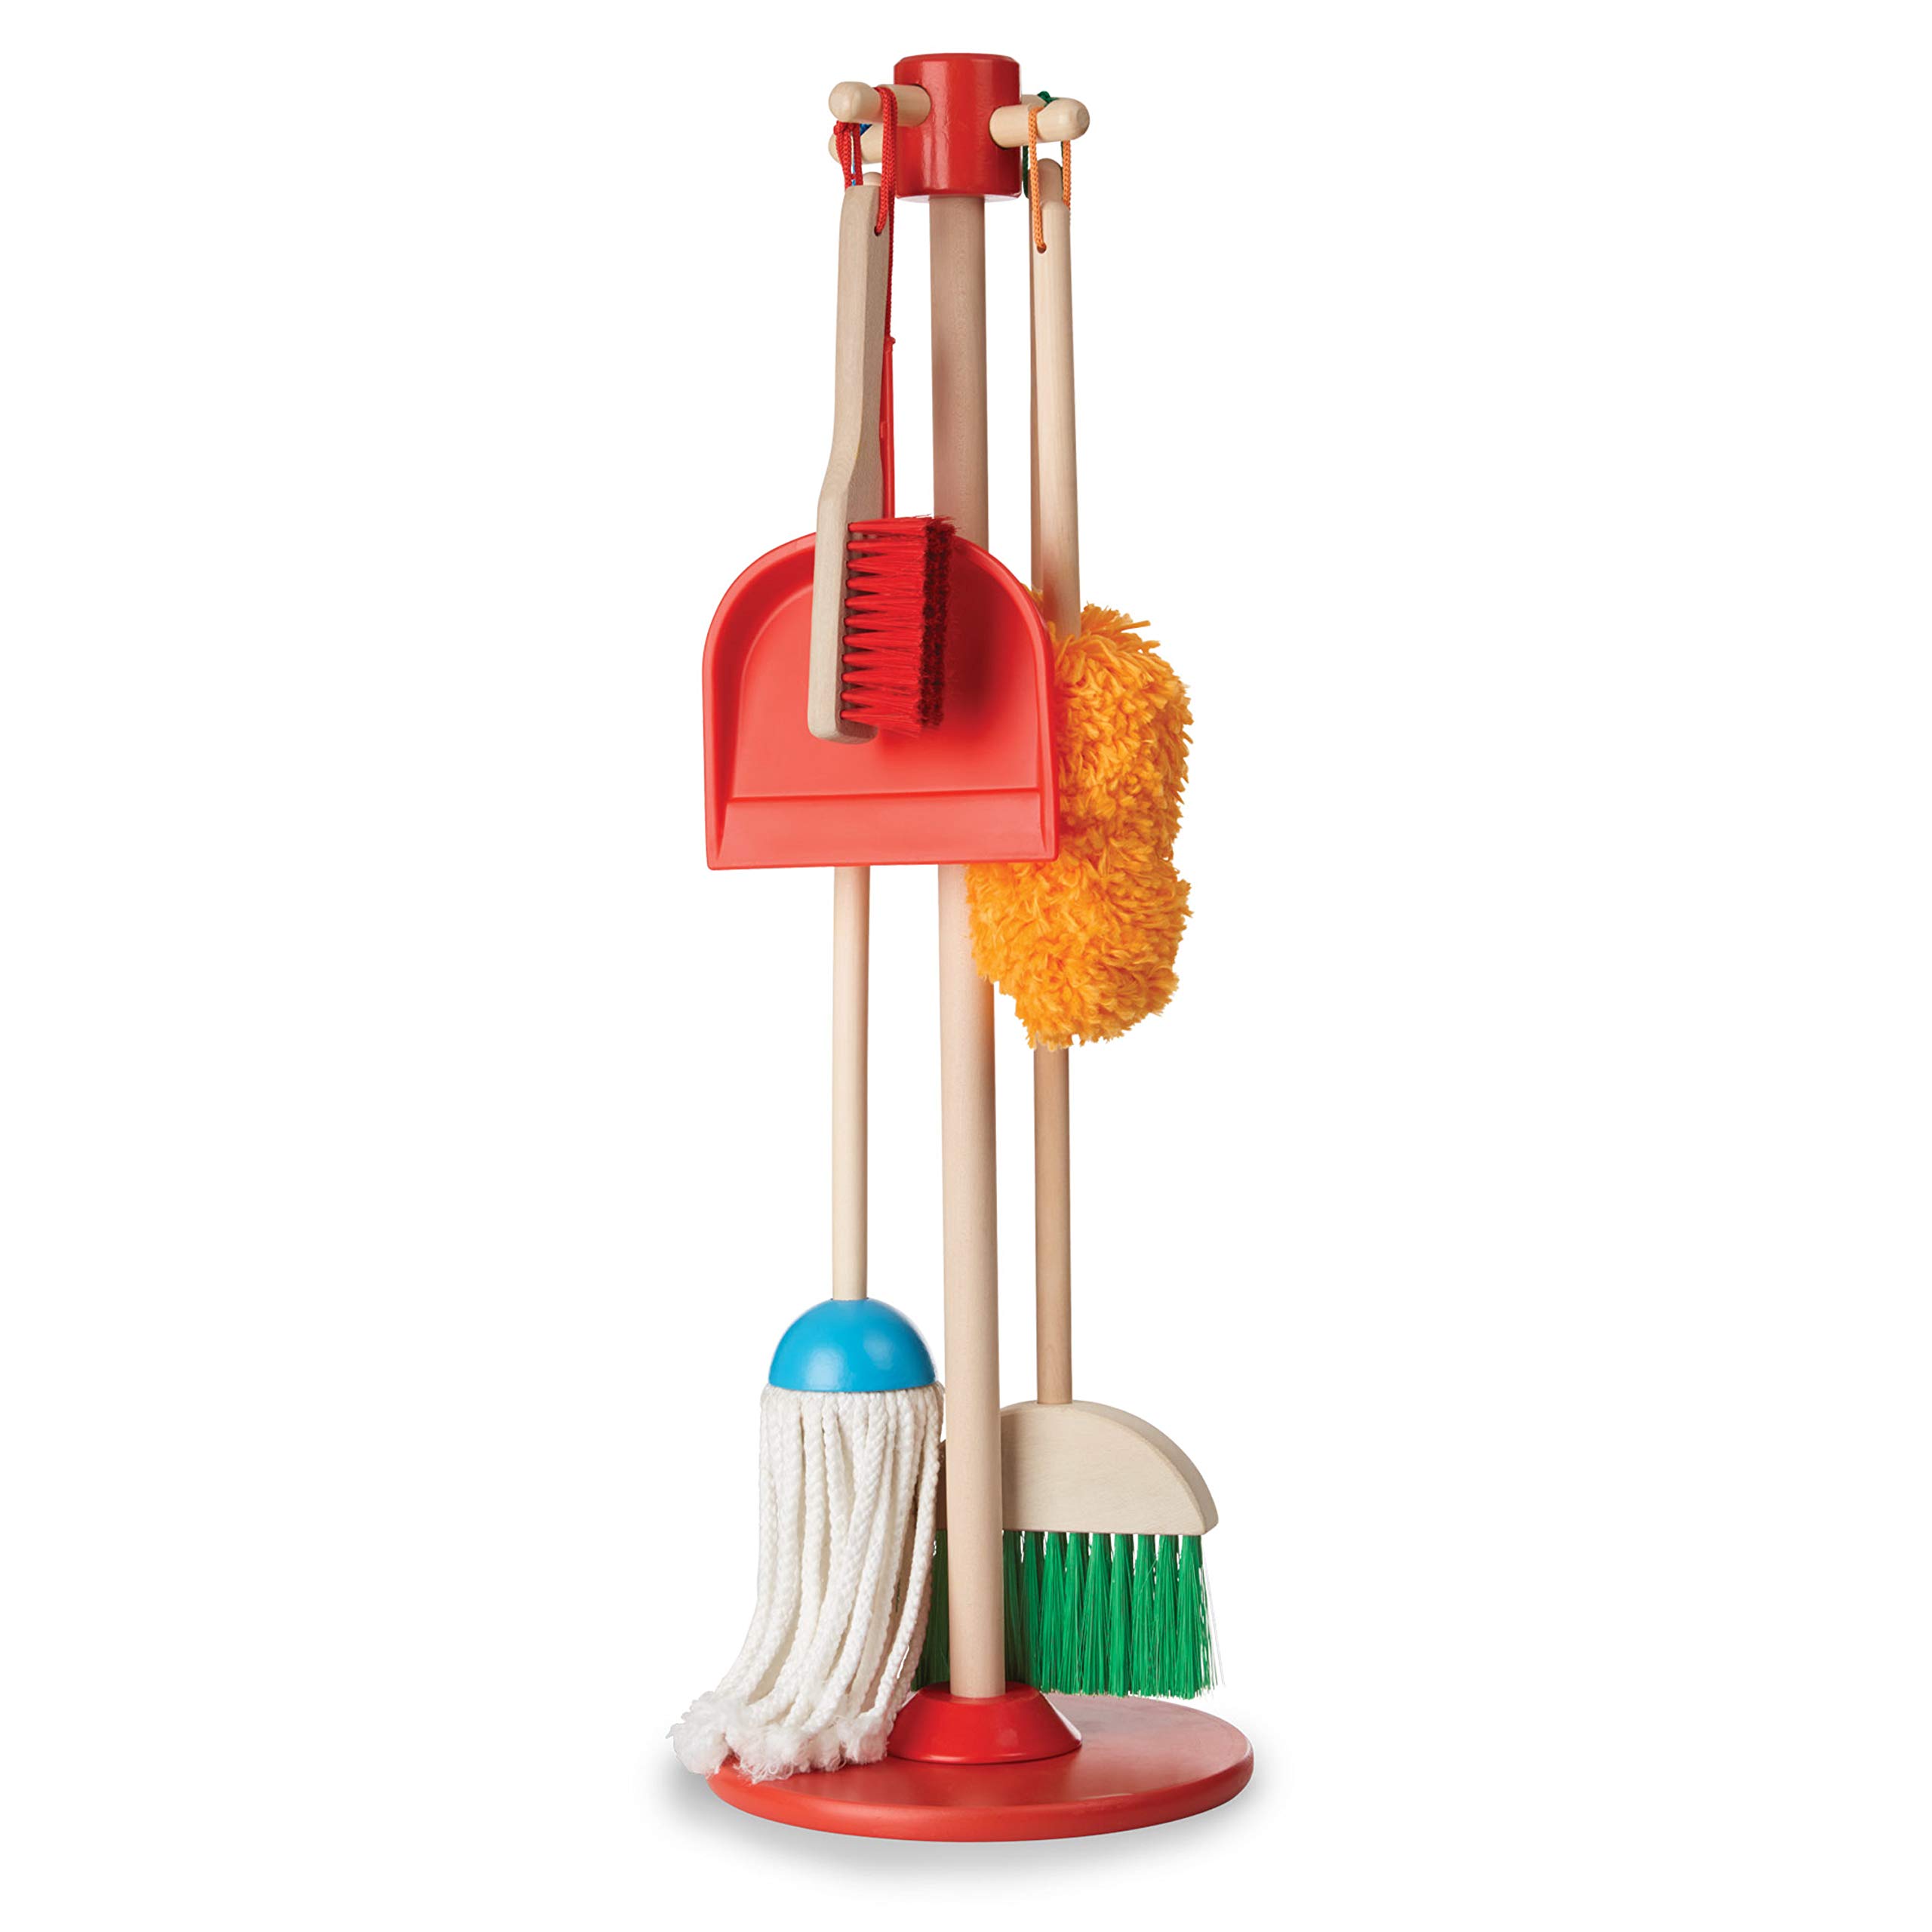 Melissa & Doug Dust! Sweep! Mop! 6-Piece Pretend Play Cleaning Set - Broom, Duster, Kid-Sized Cleaning Toys For Boys and For Girls